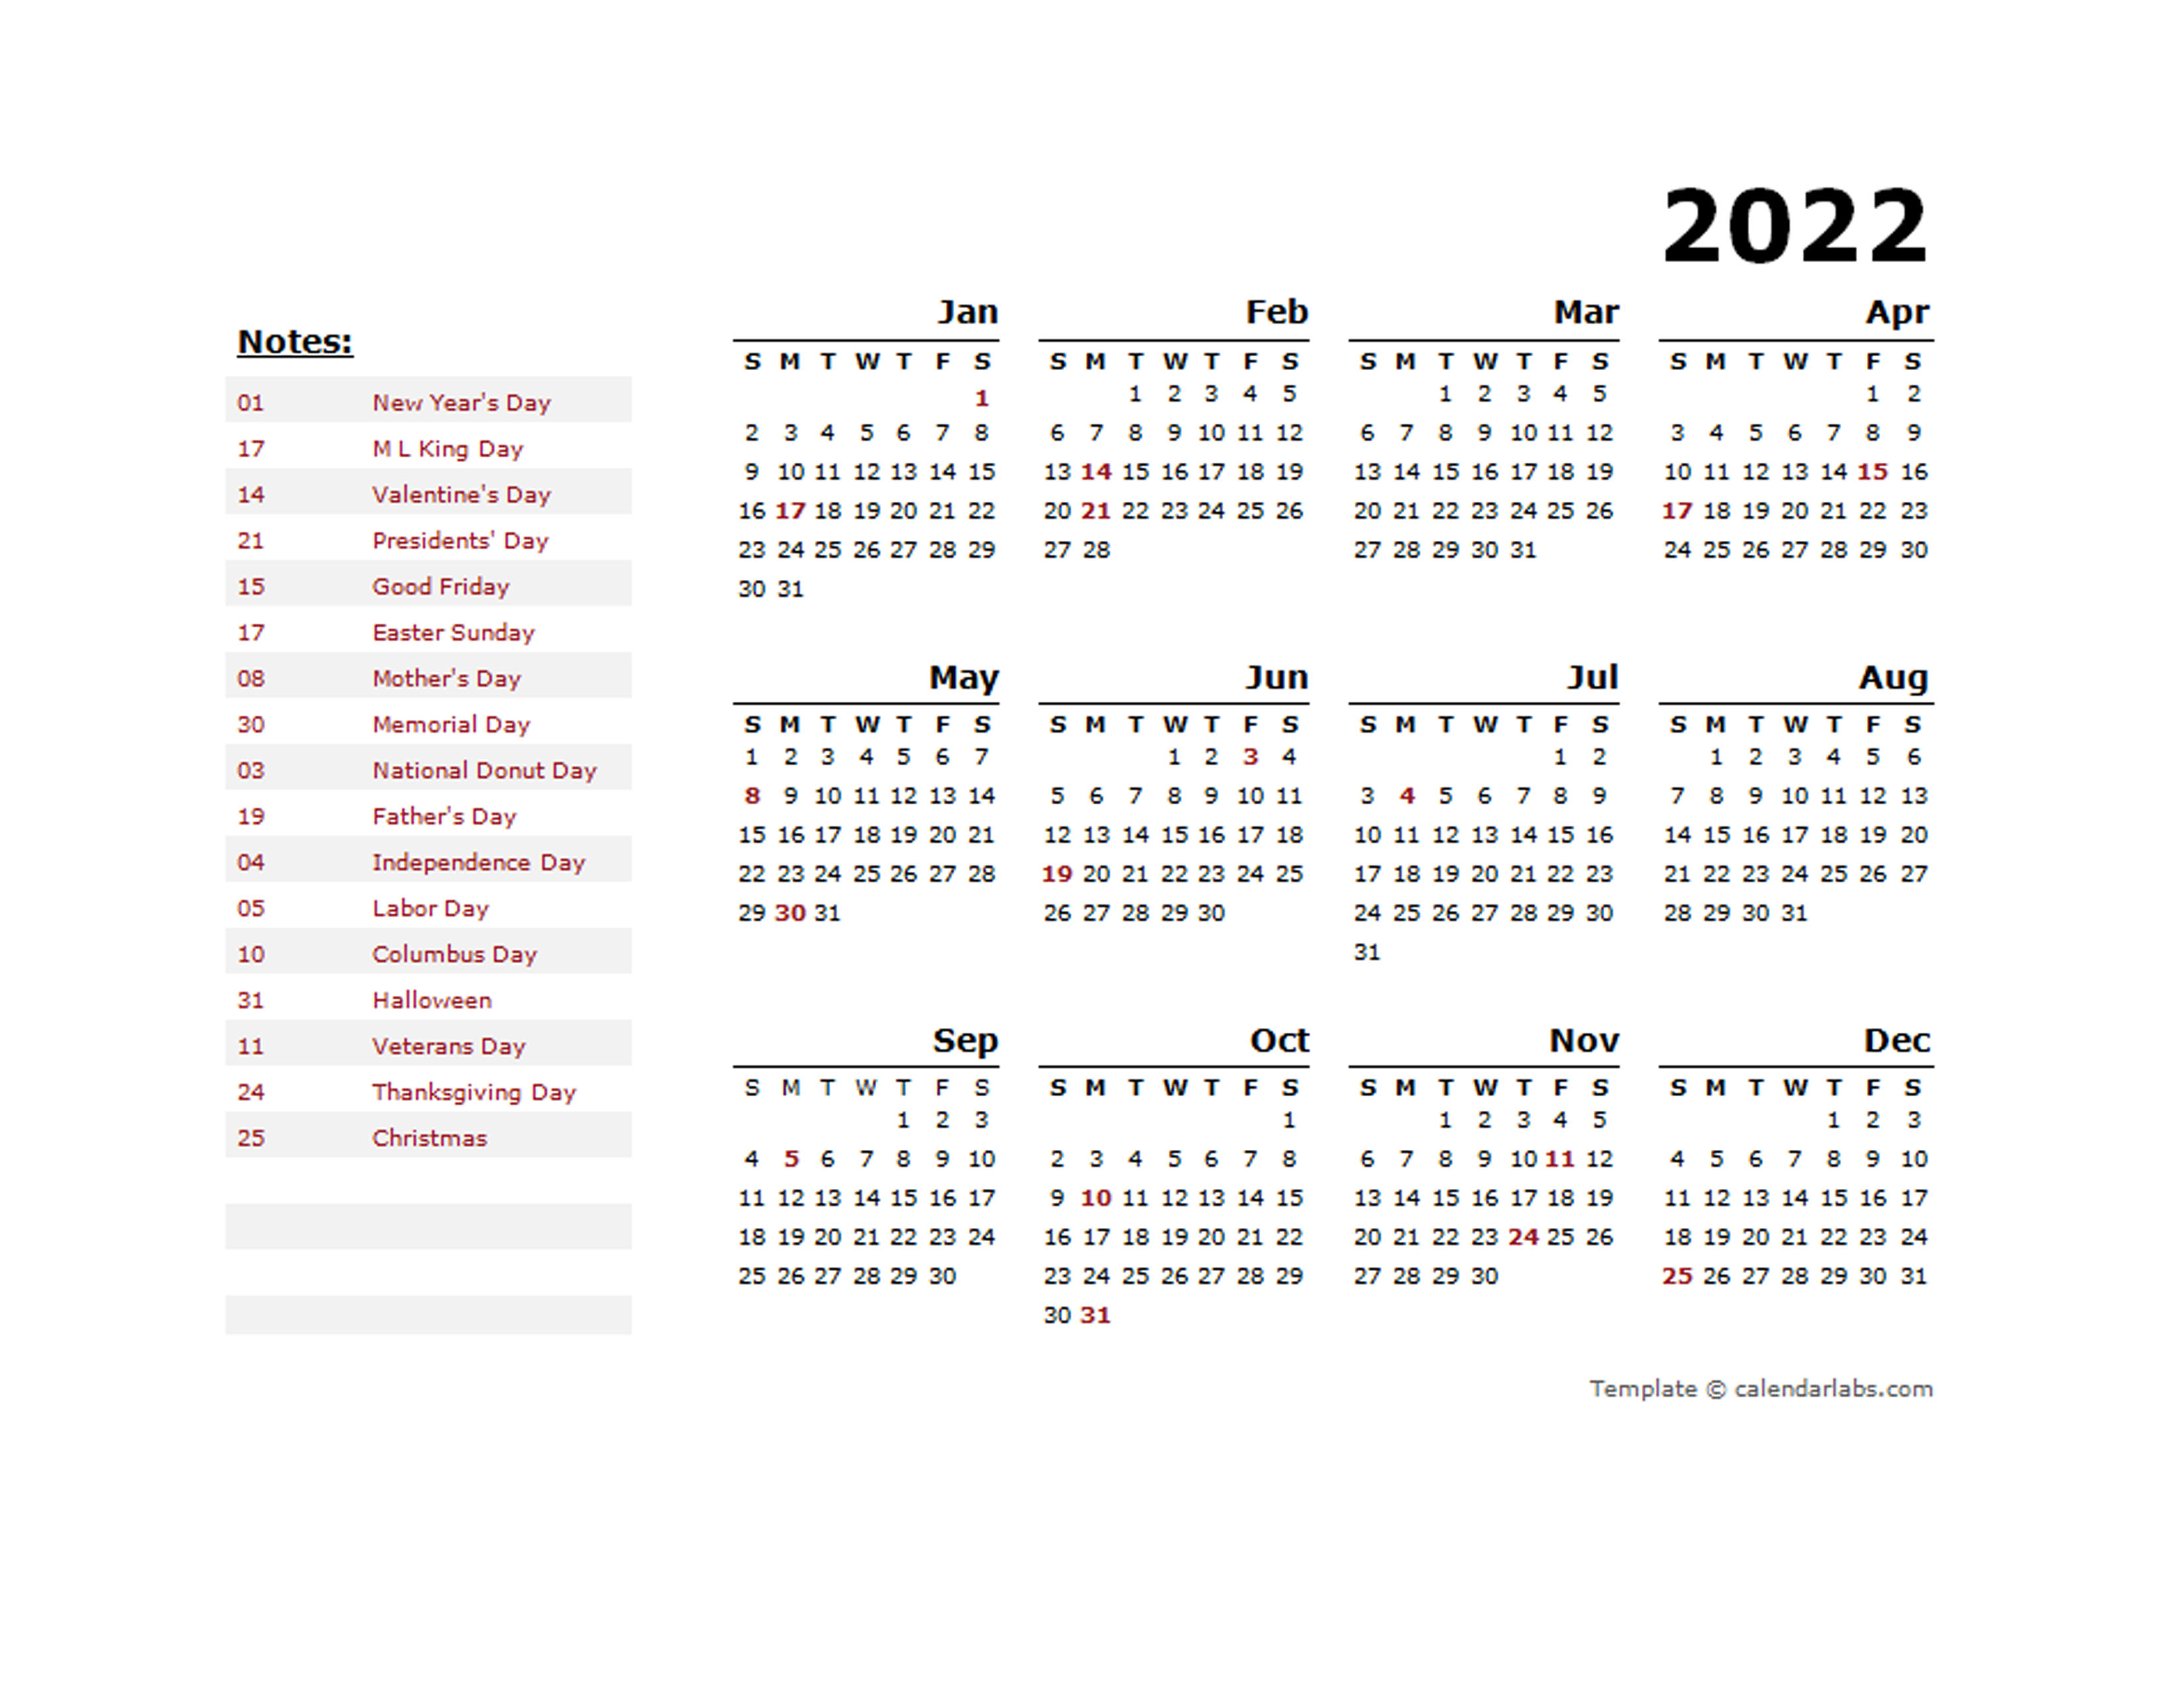 2022 Year Calendar Template with US Holidays Free